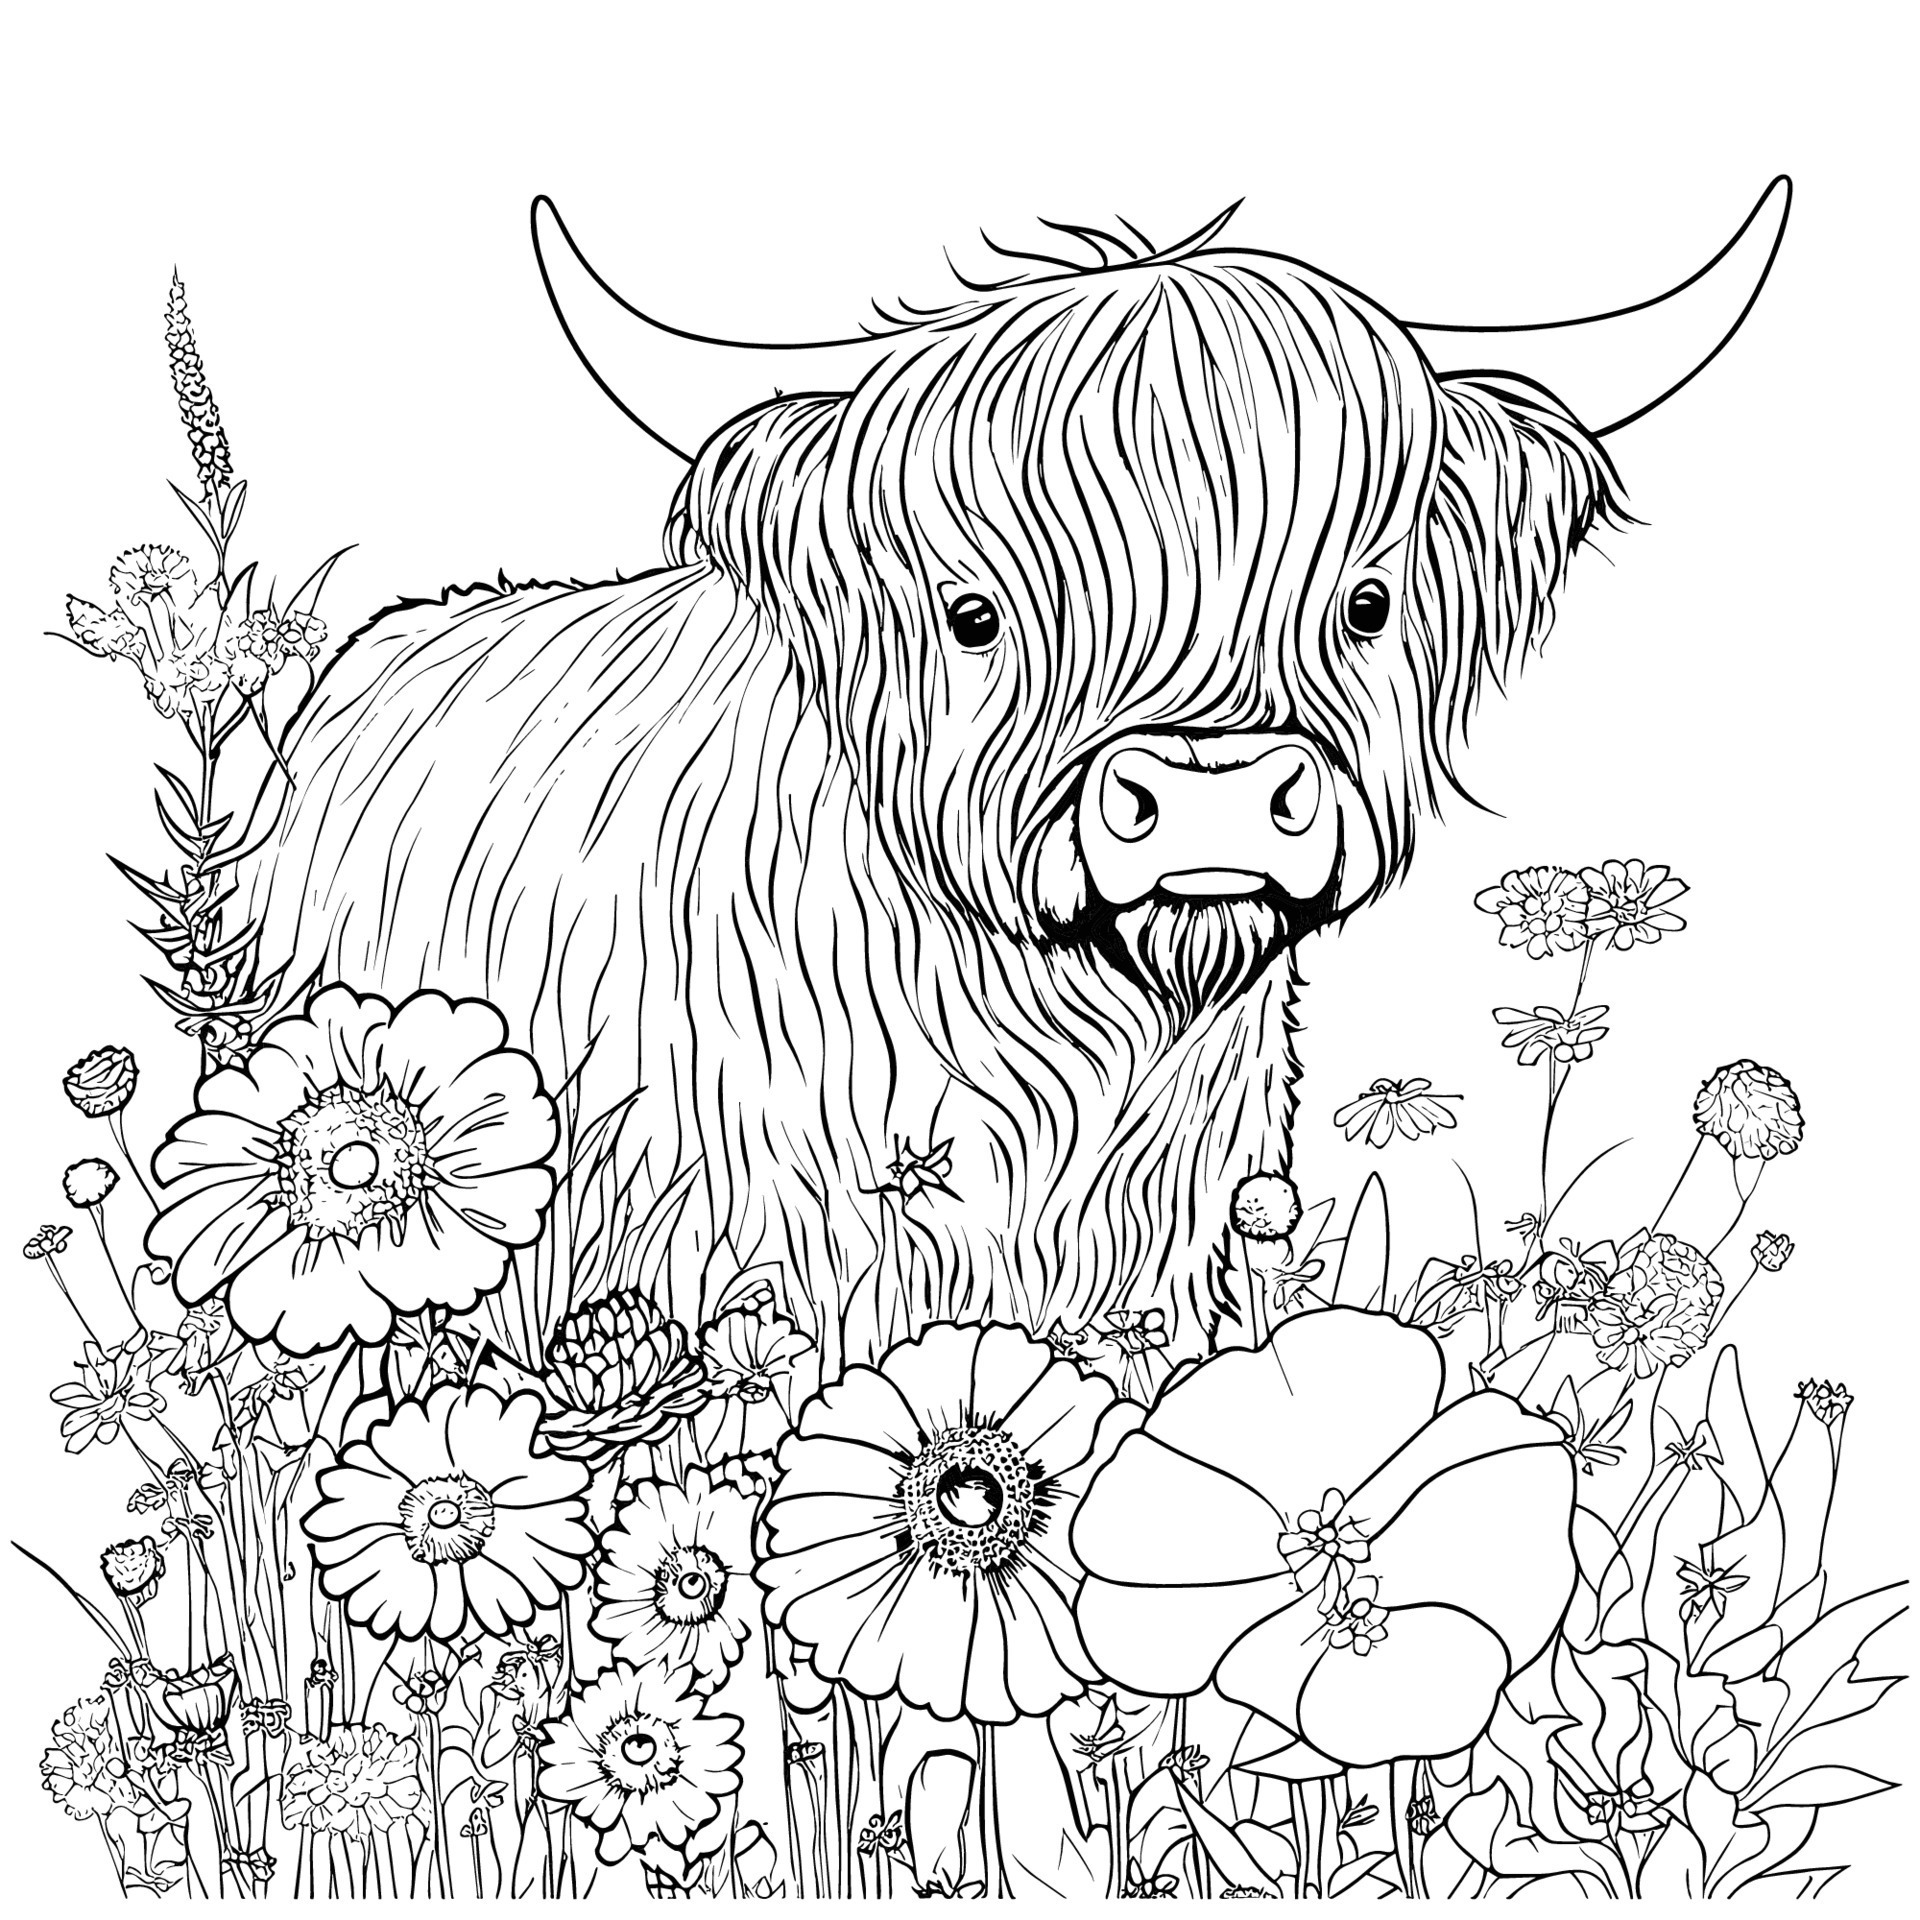 highland-cow-coloring-pages-for-adults-21984889-vector-art-at-vecteezy